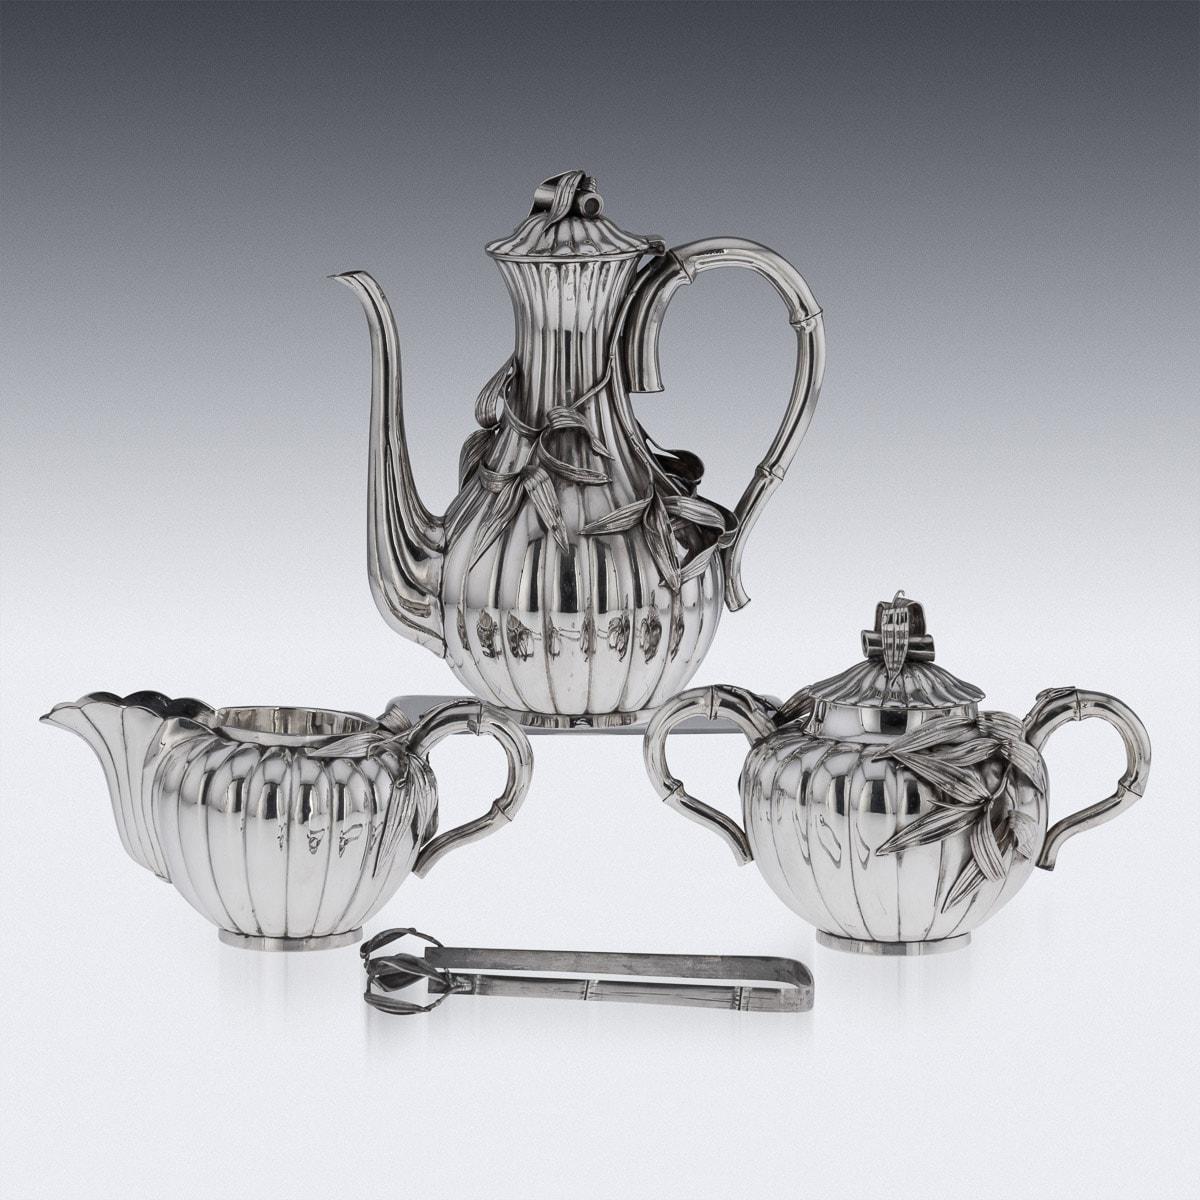 20th Century Japanese Solid Silver Coffee Set On Tray, Arthur & Bond, c.1900 For Sale 1